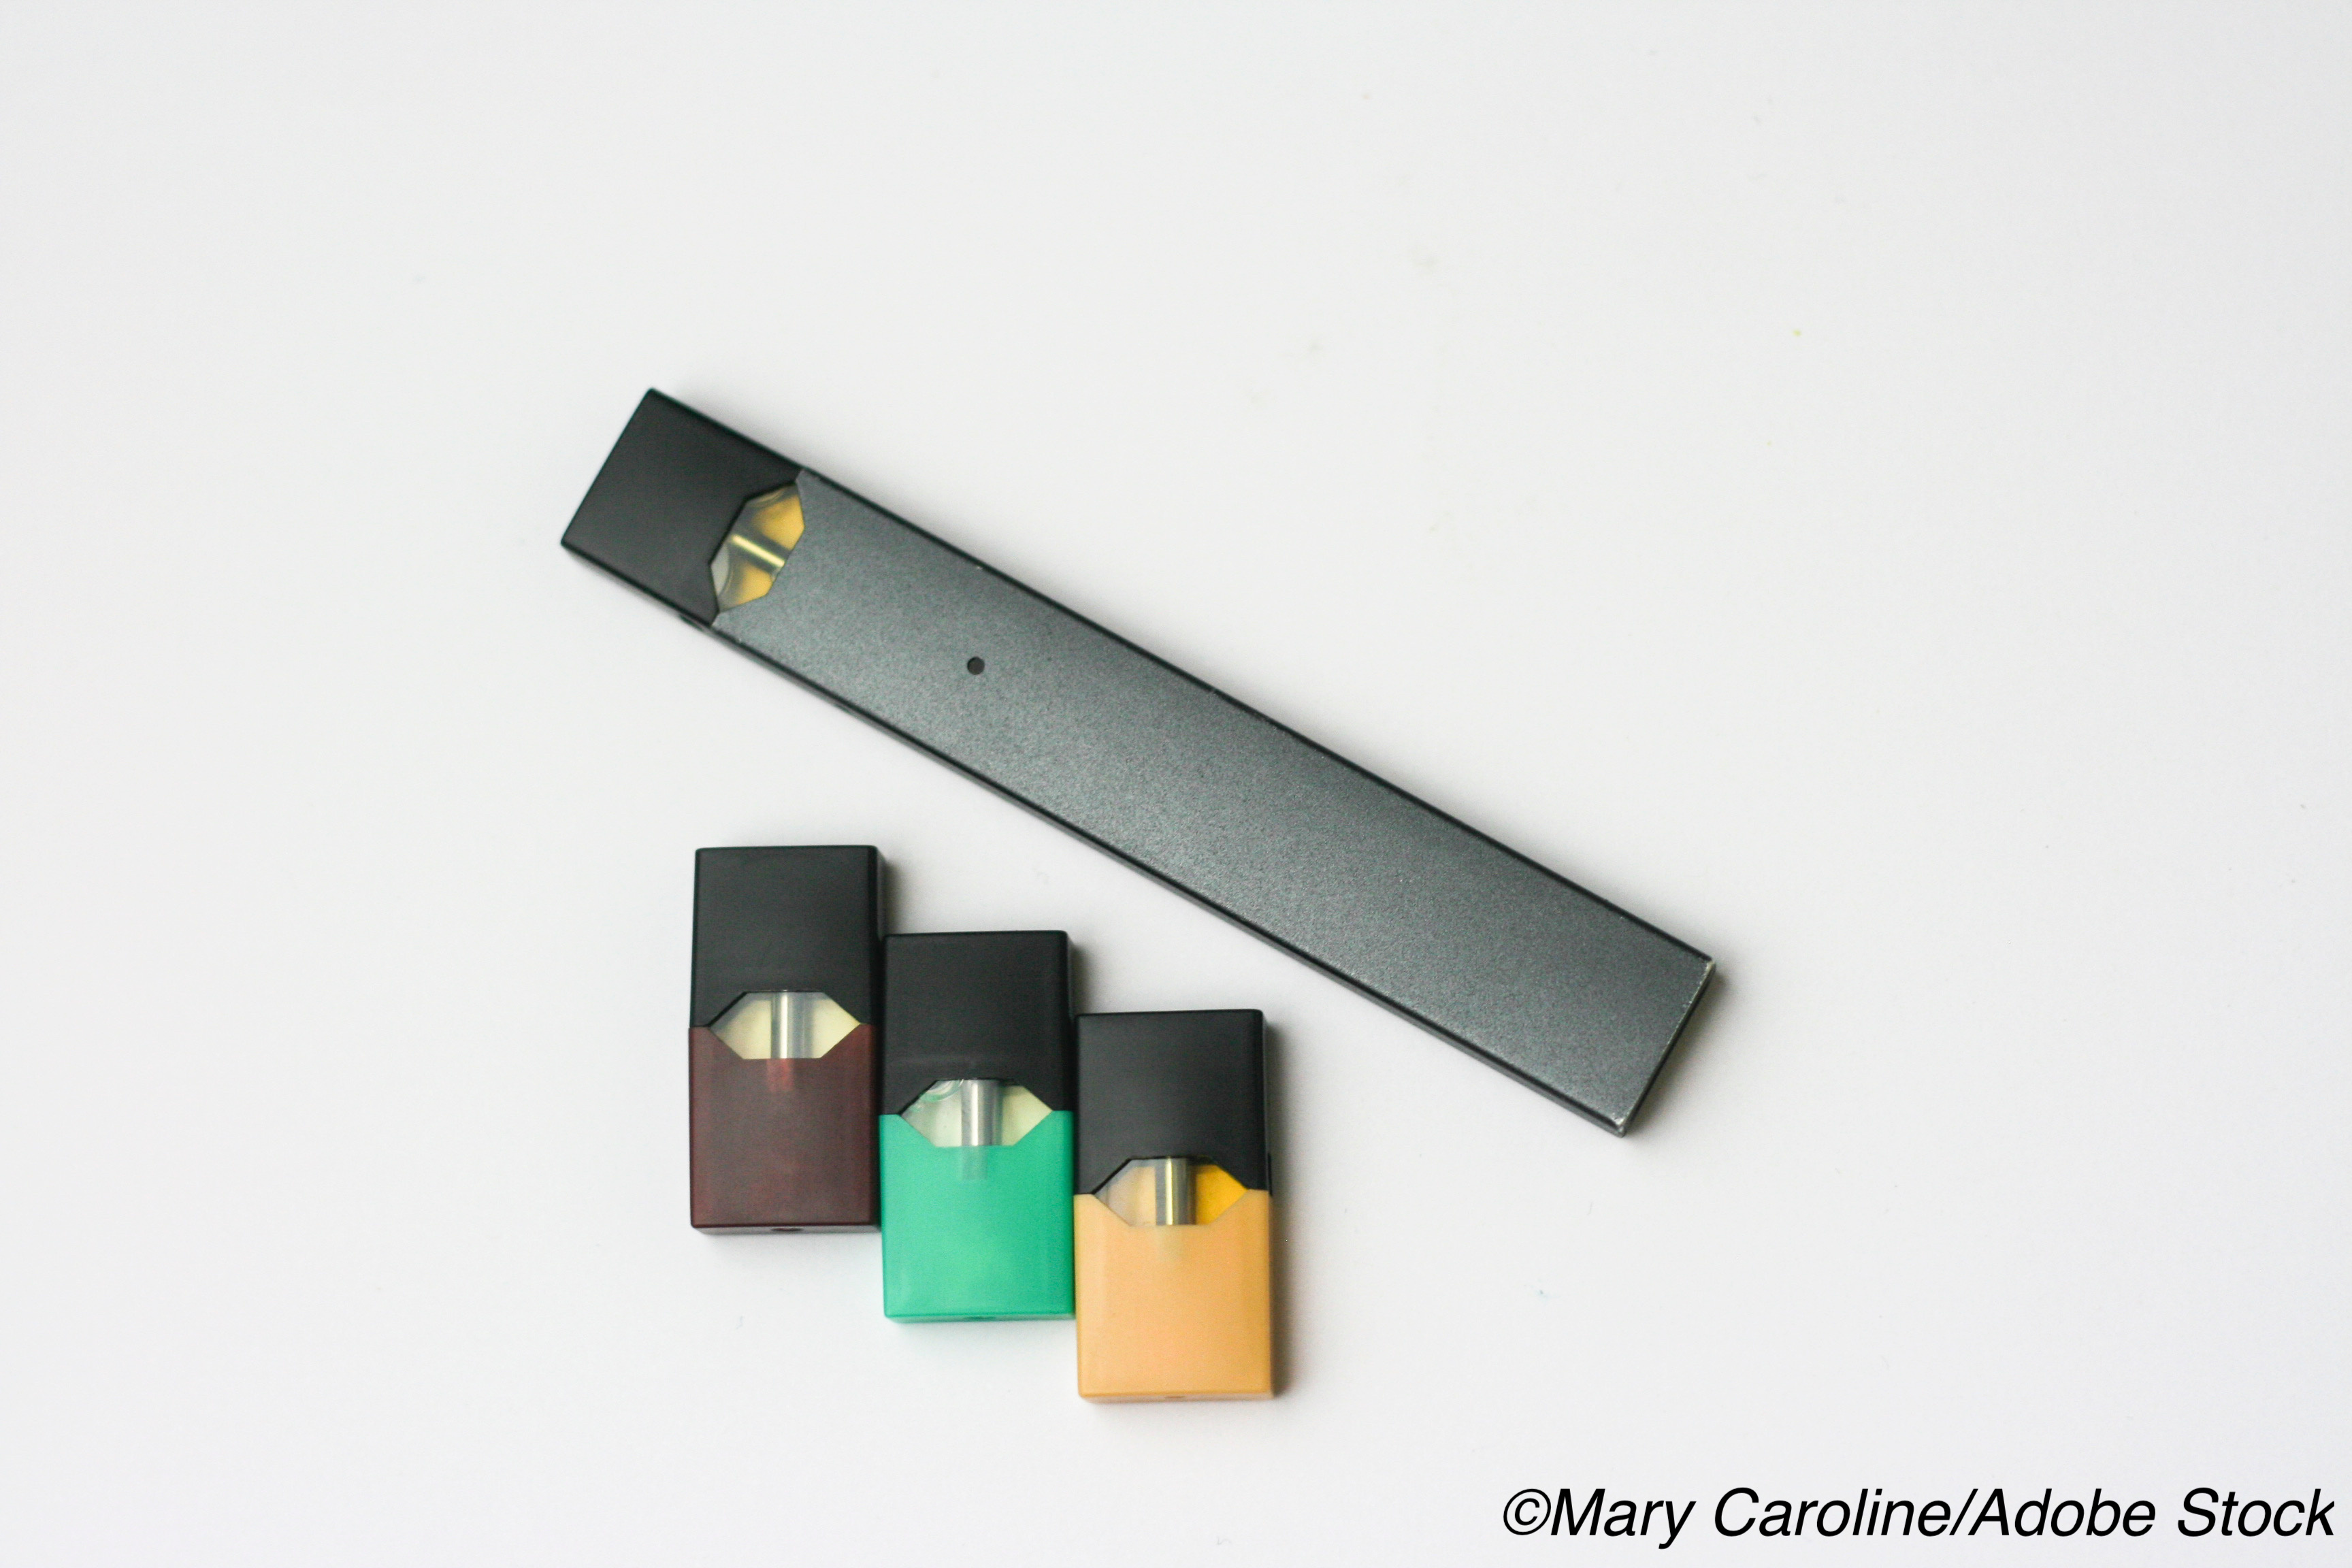 FDA Forces 10 Companies to Pull Illegal E-Cig Products from the Market